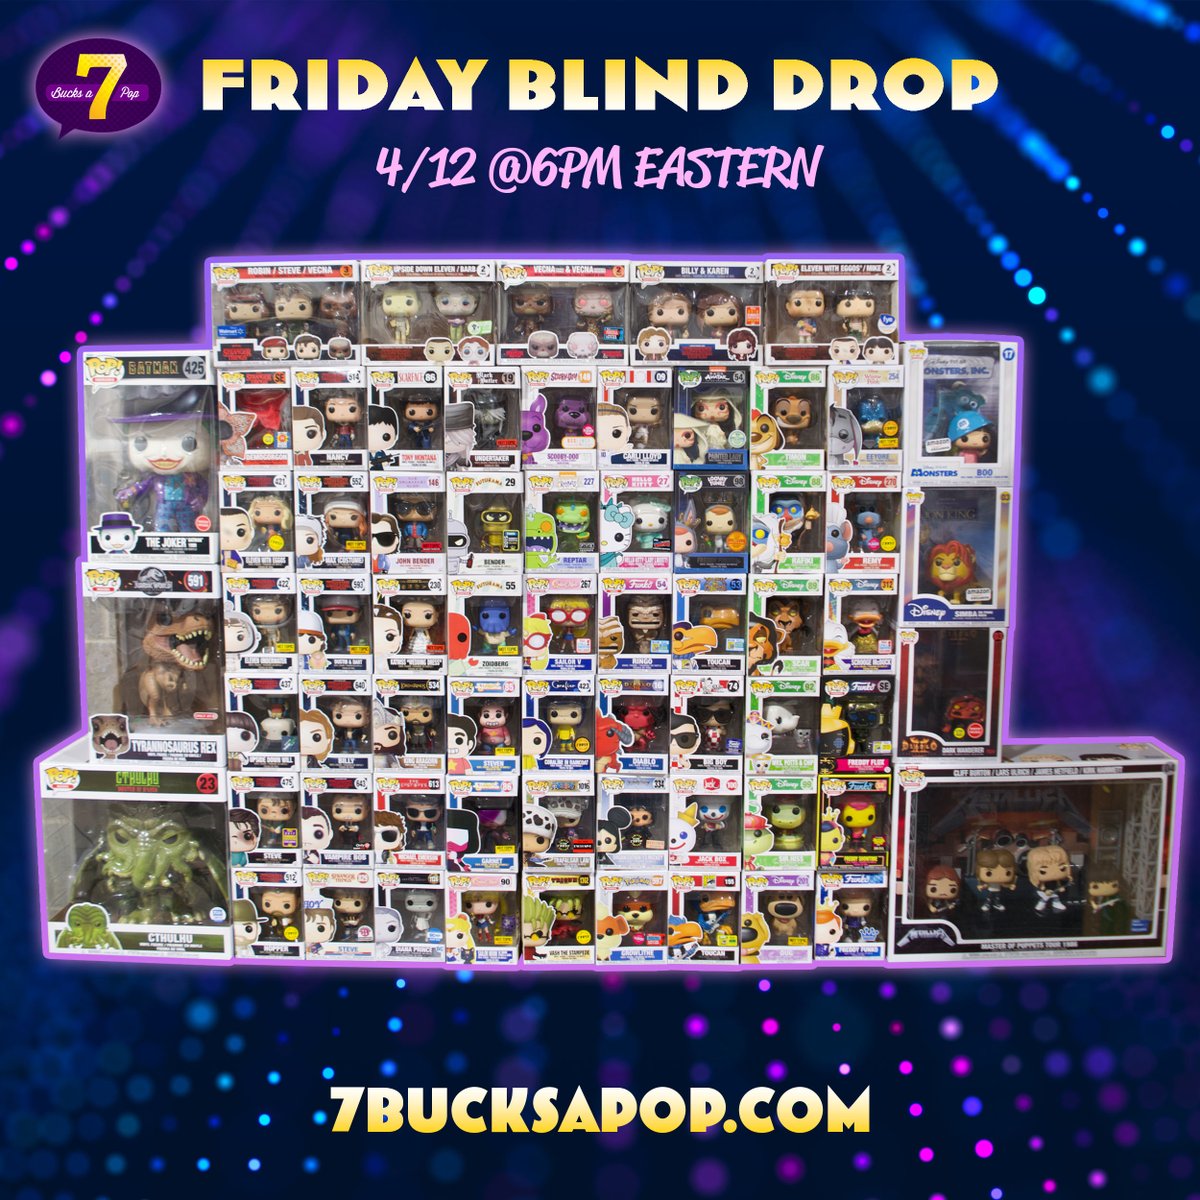 It's time for that FUN Friday reveal time! How did everyone do?

Don't forget about our Pokémon #7BAPSignatureSeries dropping Saturday!
#7BucksAPop #7BAP #Funko